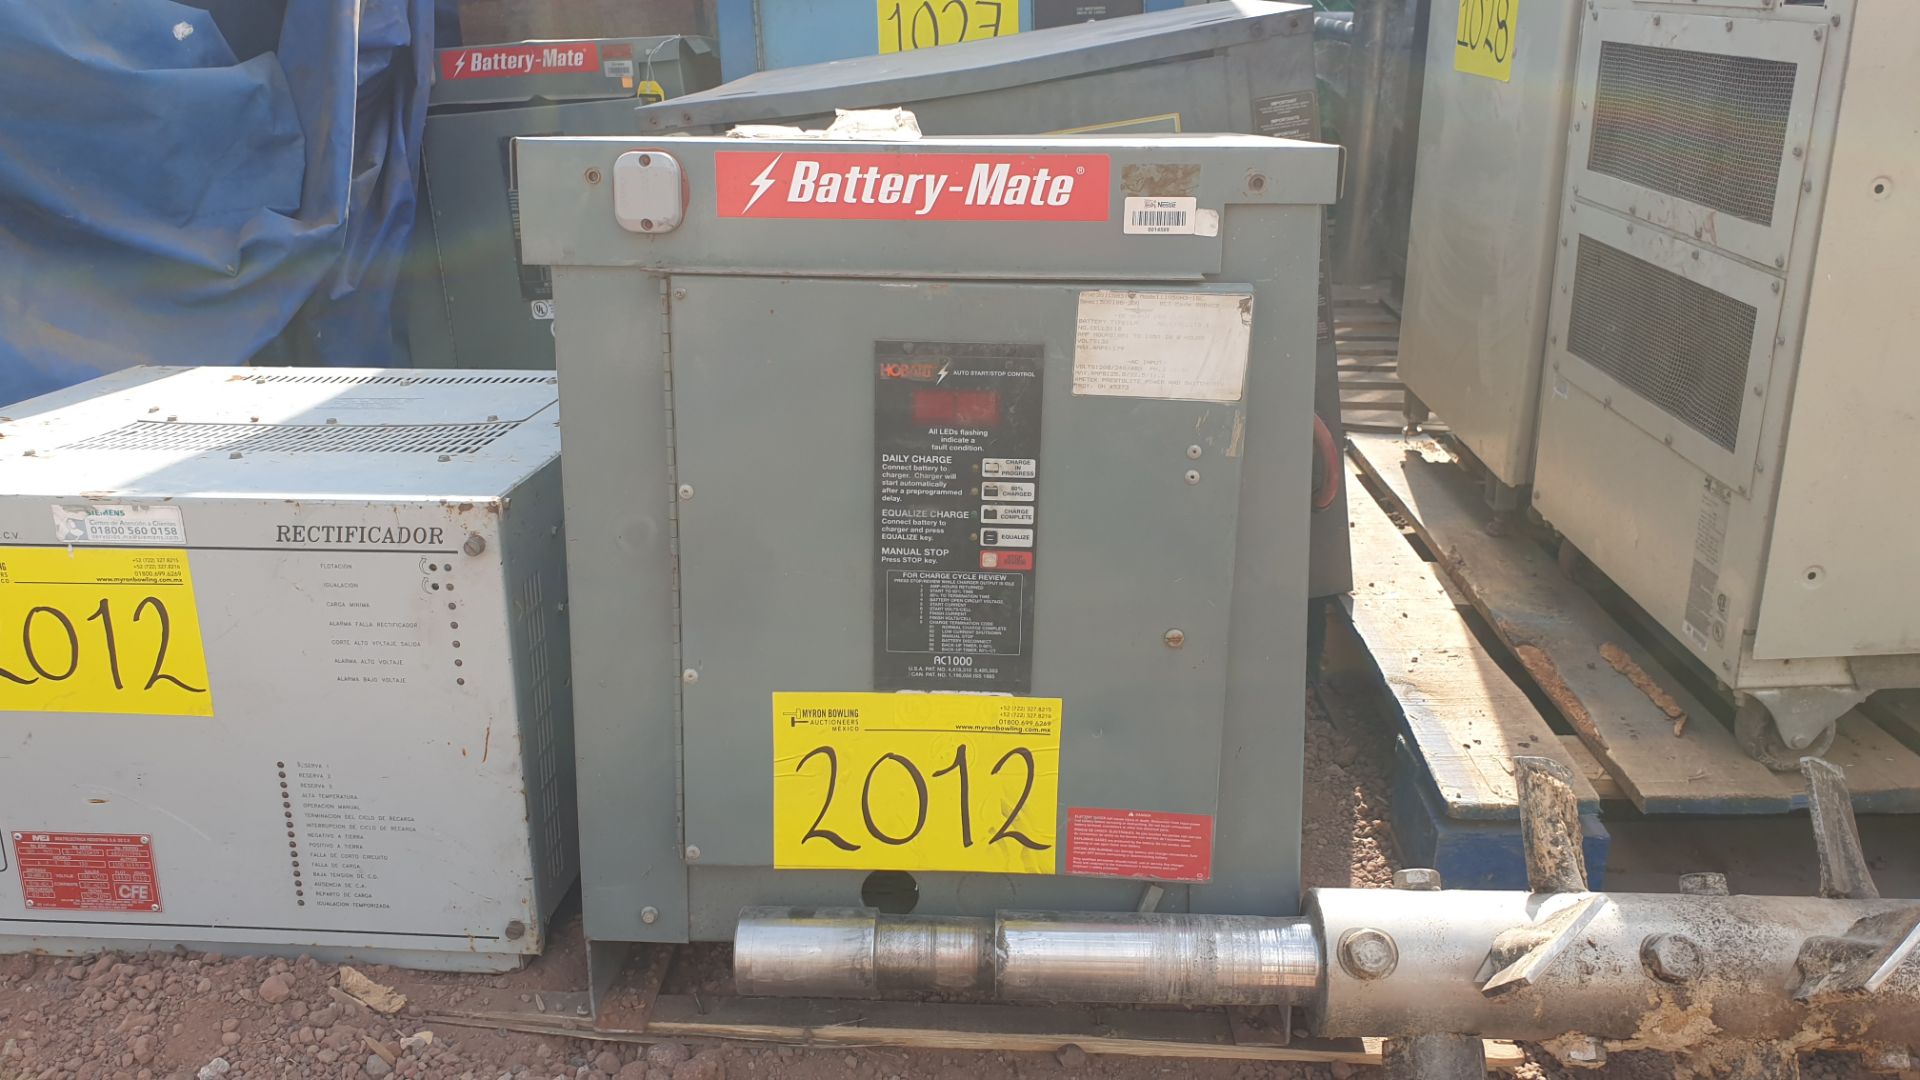 1 MEI Rectifier charger model KFT50130 N/S B14120459 220-440V year 2014 - Image 7 of 11